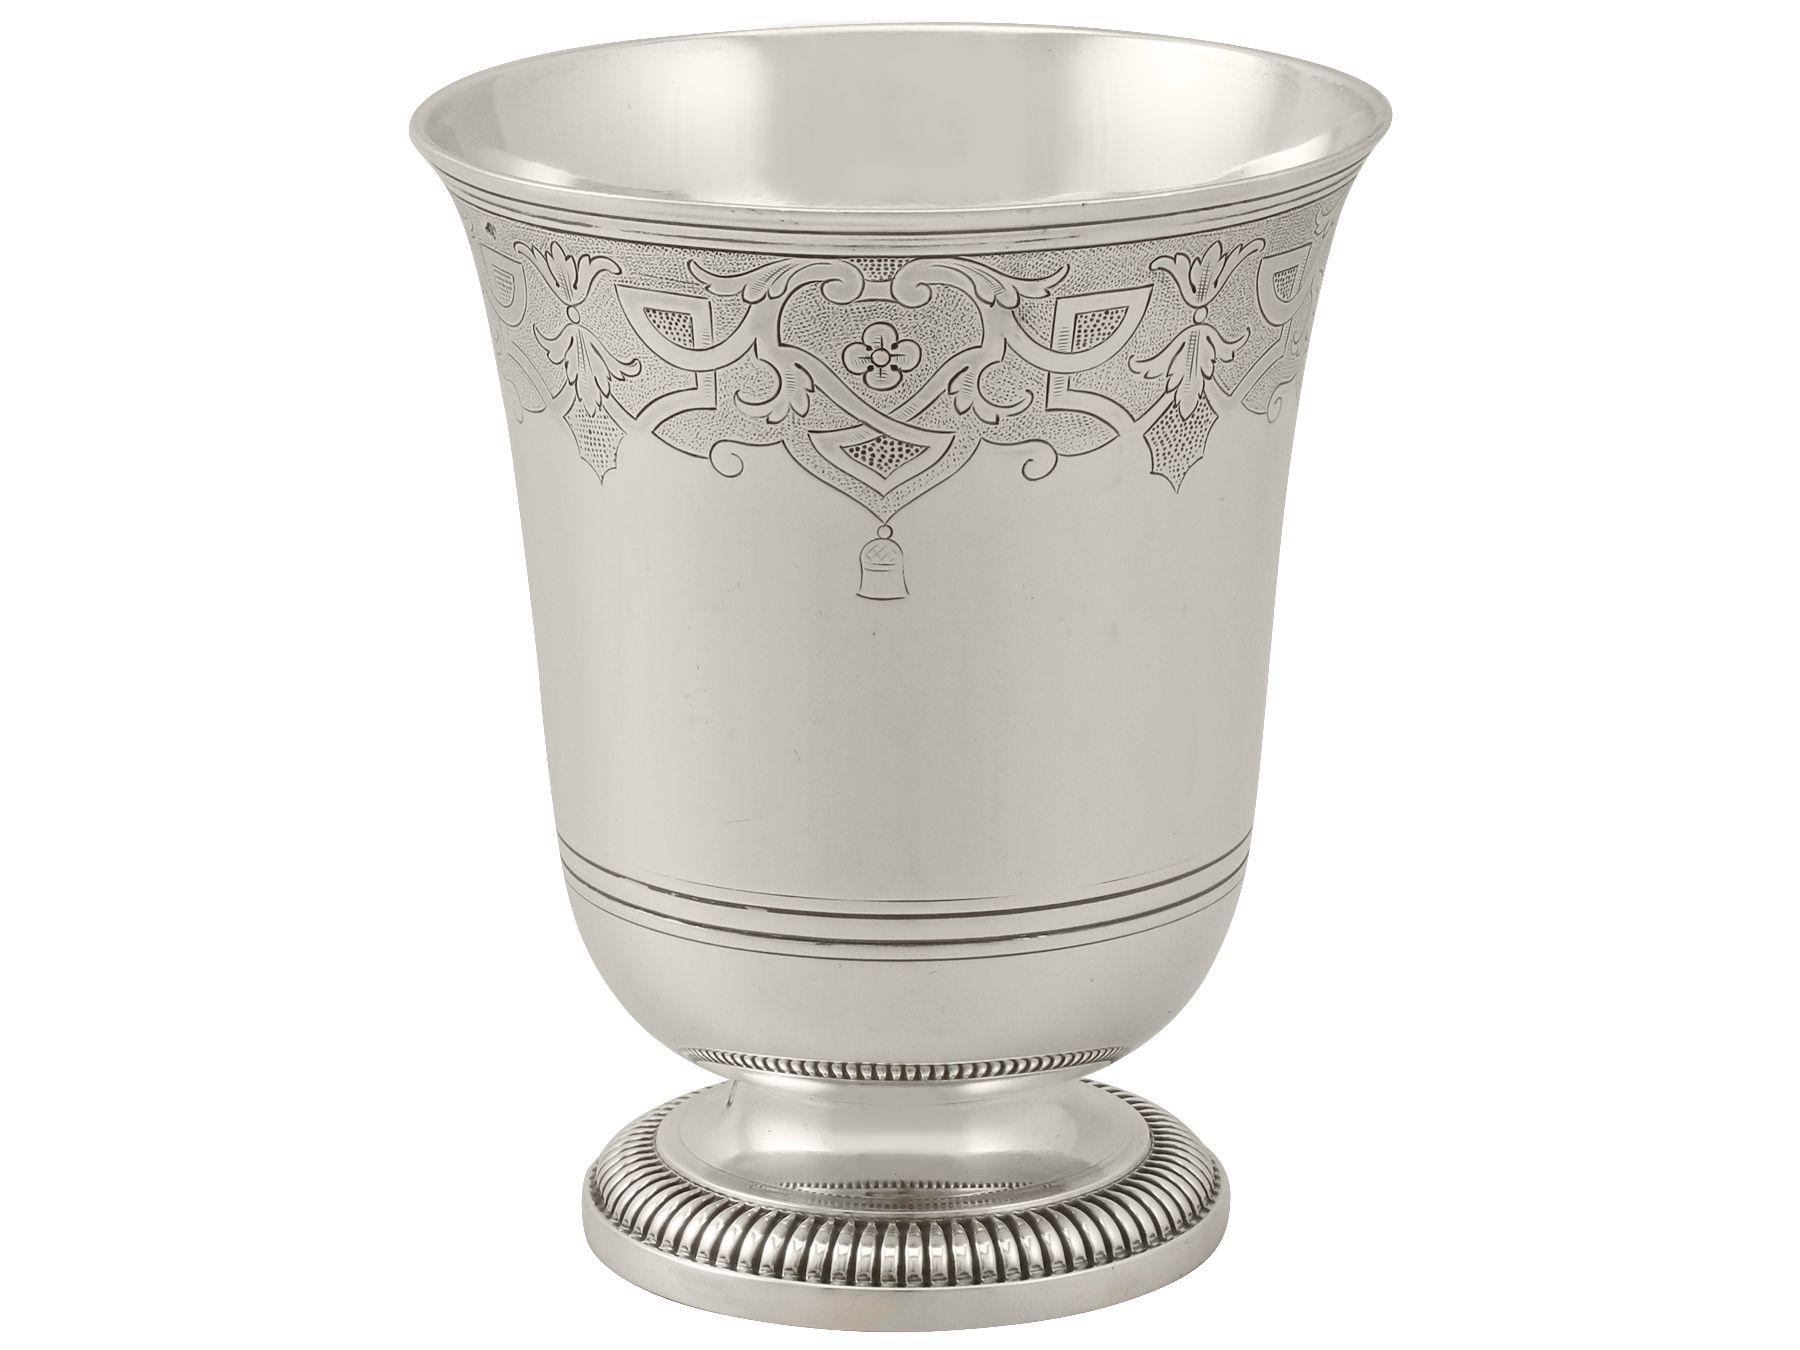 An exceptional, fine and impressive antique French silver beaker made by Emile Puiforcat; an addition to our continental silverware collection.

This exceptional antique French silver beaker has a plain cylindrical rounded form.

The upper